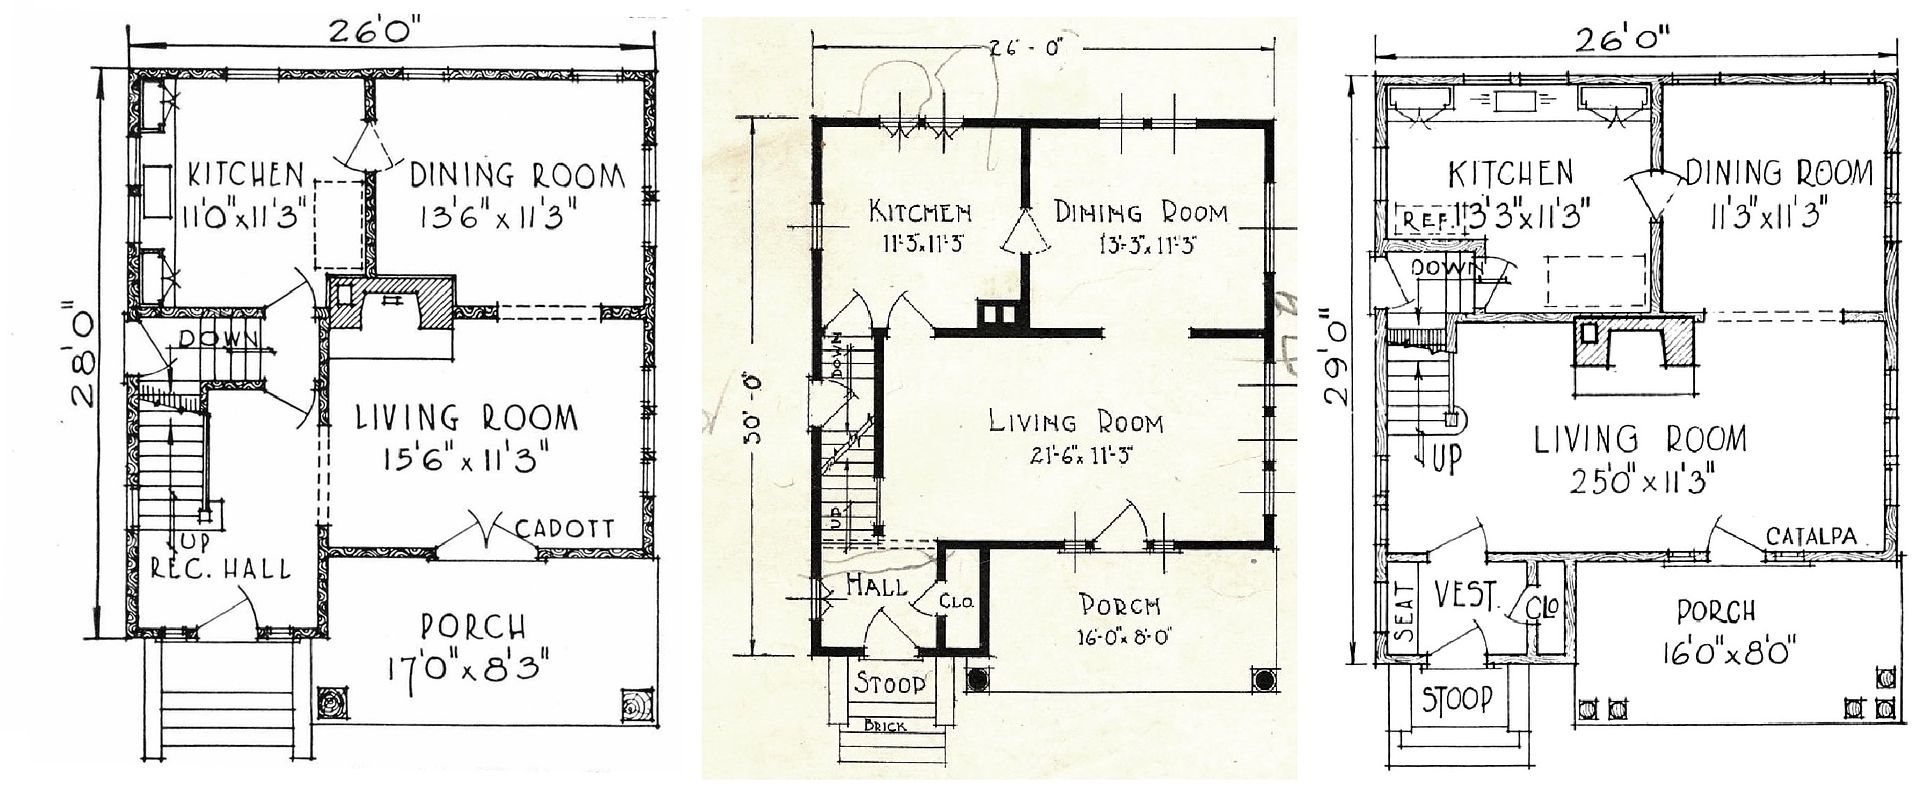 Whats really fun is to compare these three floorplans side-by-side. 